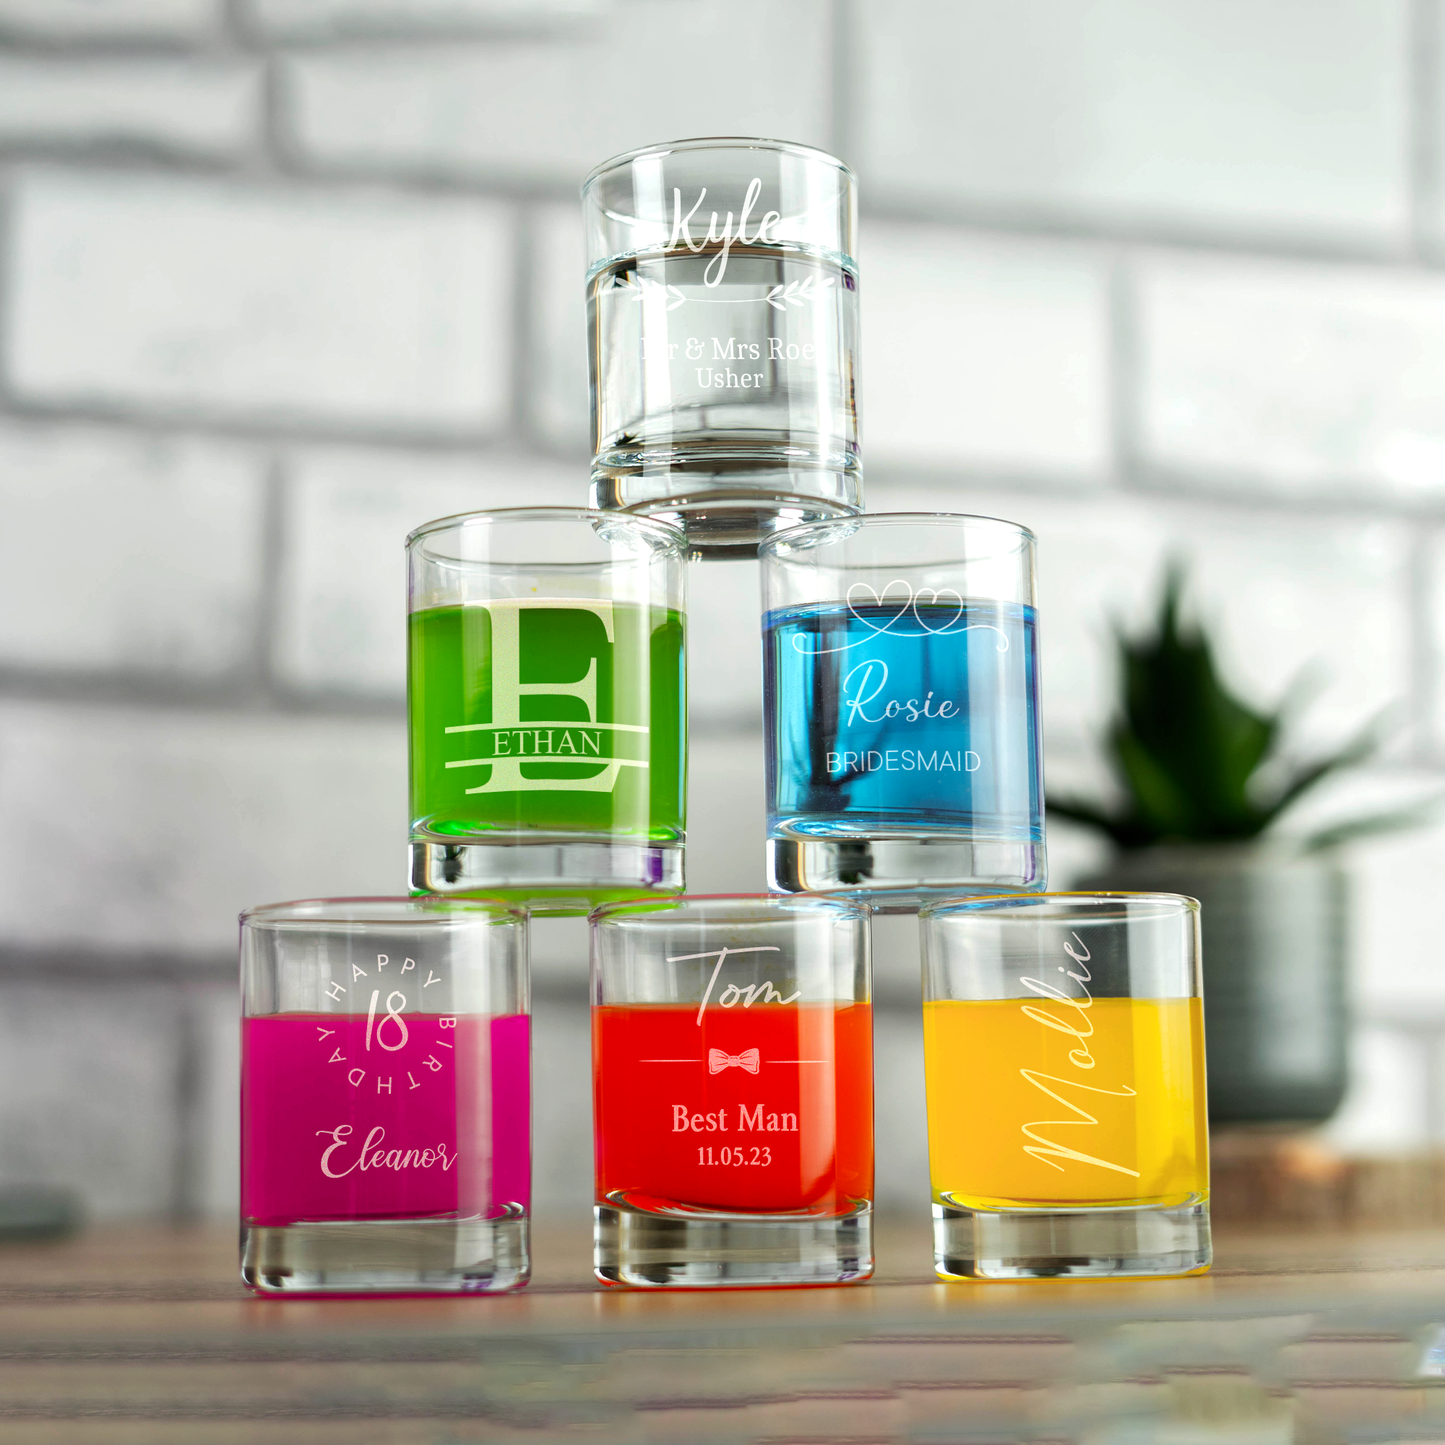 Personalised Engraved Shot Glass